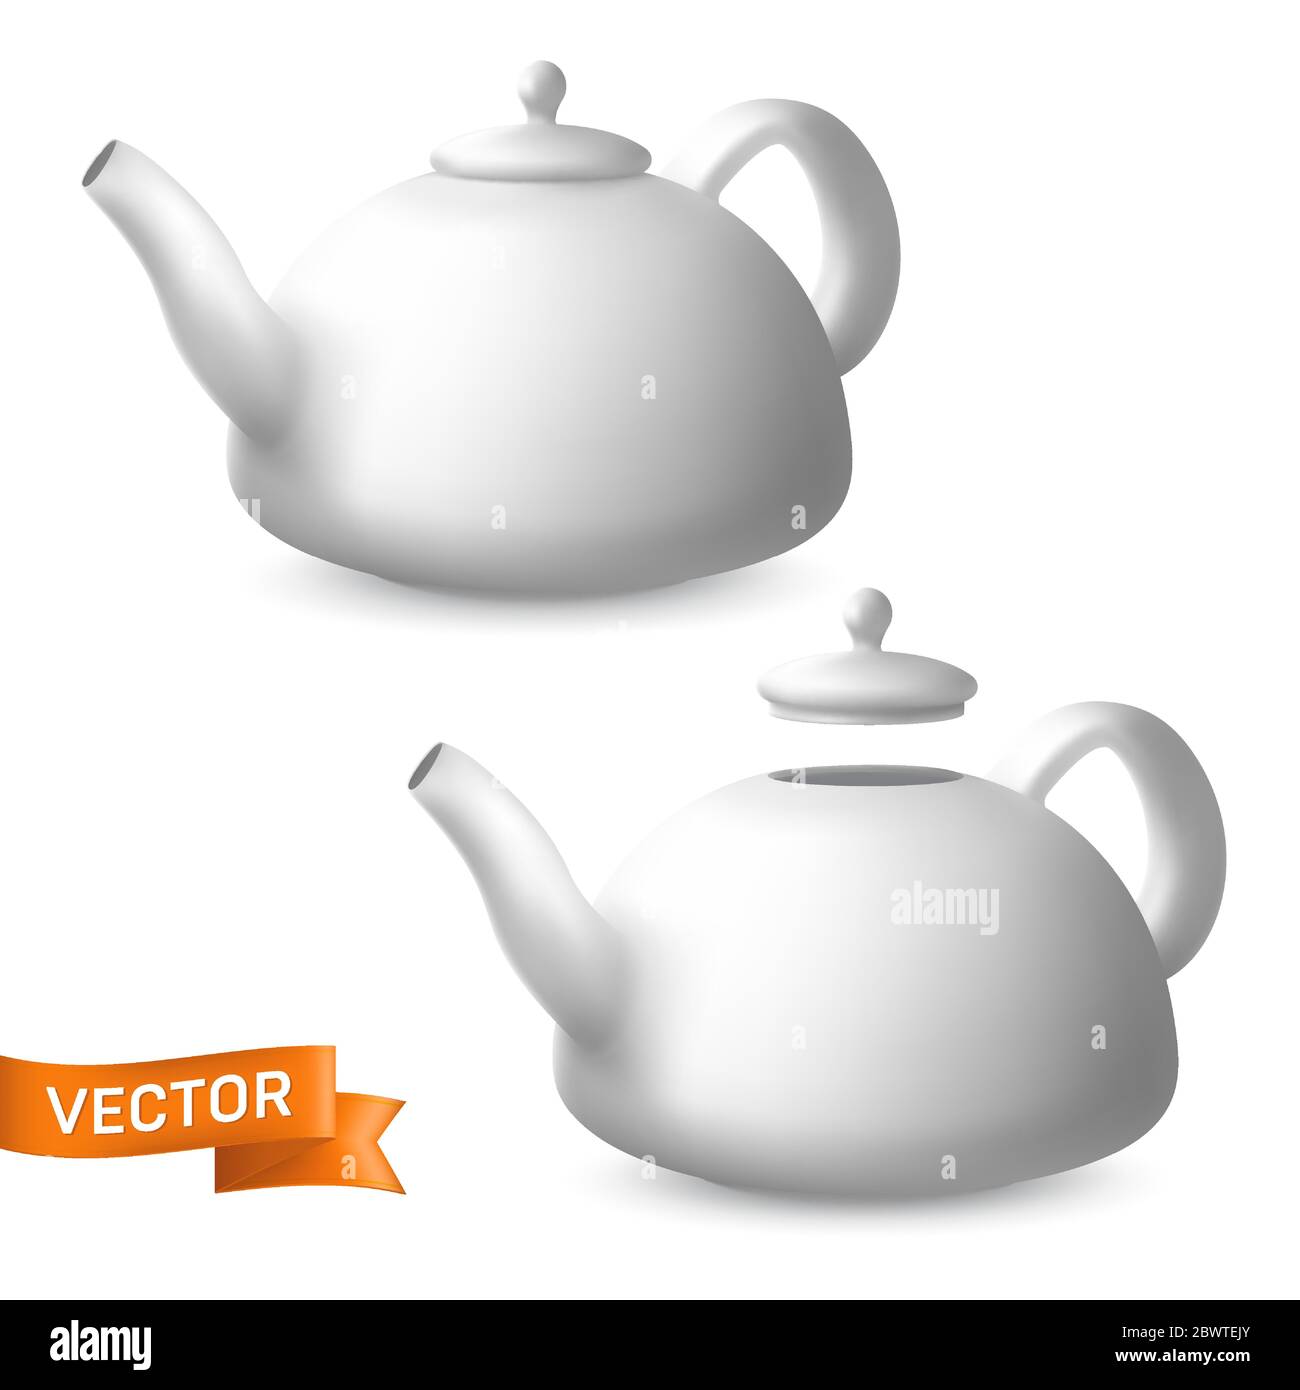 https://c8.alamy.com/comp/2BWTEJY/porcelain-teapots-side-view-vector-set-realistic-illustration-of-ceramic-kettles-with-lids-modern-tableware-crockery-pot-for-tea-and-other-hot-drink-2BWTEJY.jpg